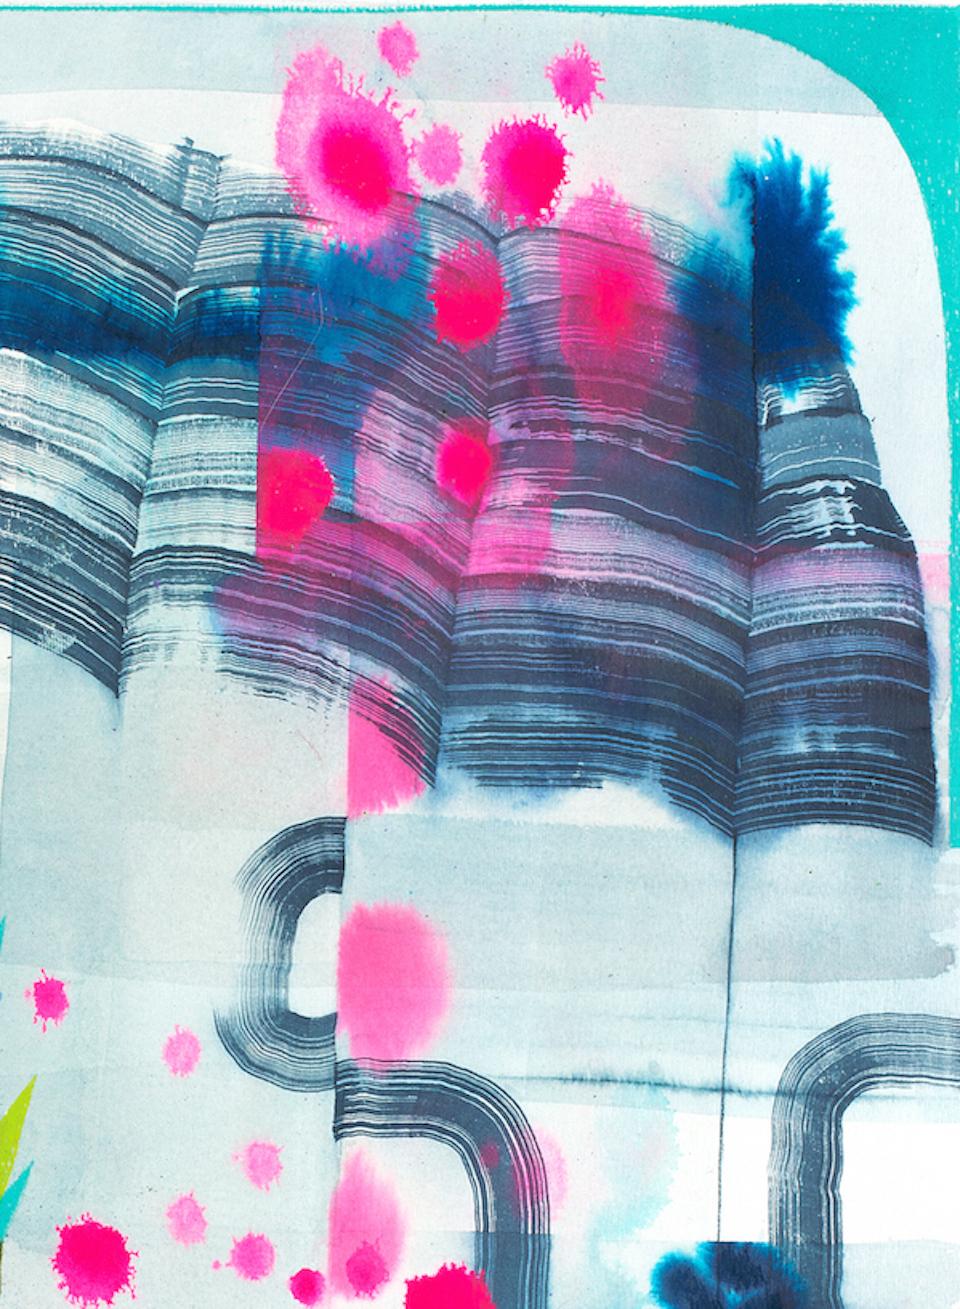 Untitled 392, Vertical Abstract Landscape in Pink, Blue, Teal, Green, Purple - Contemporary Mixed Media Art by Gabe Brown